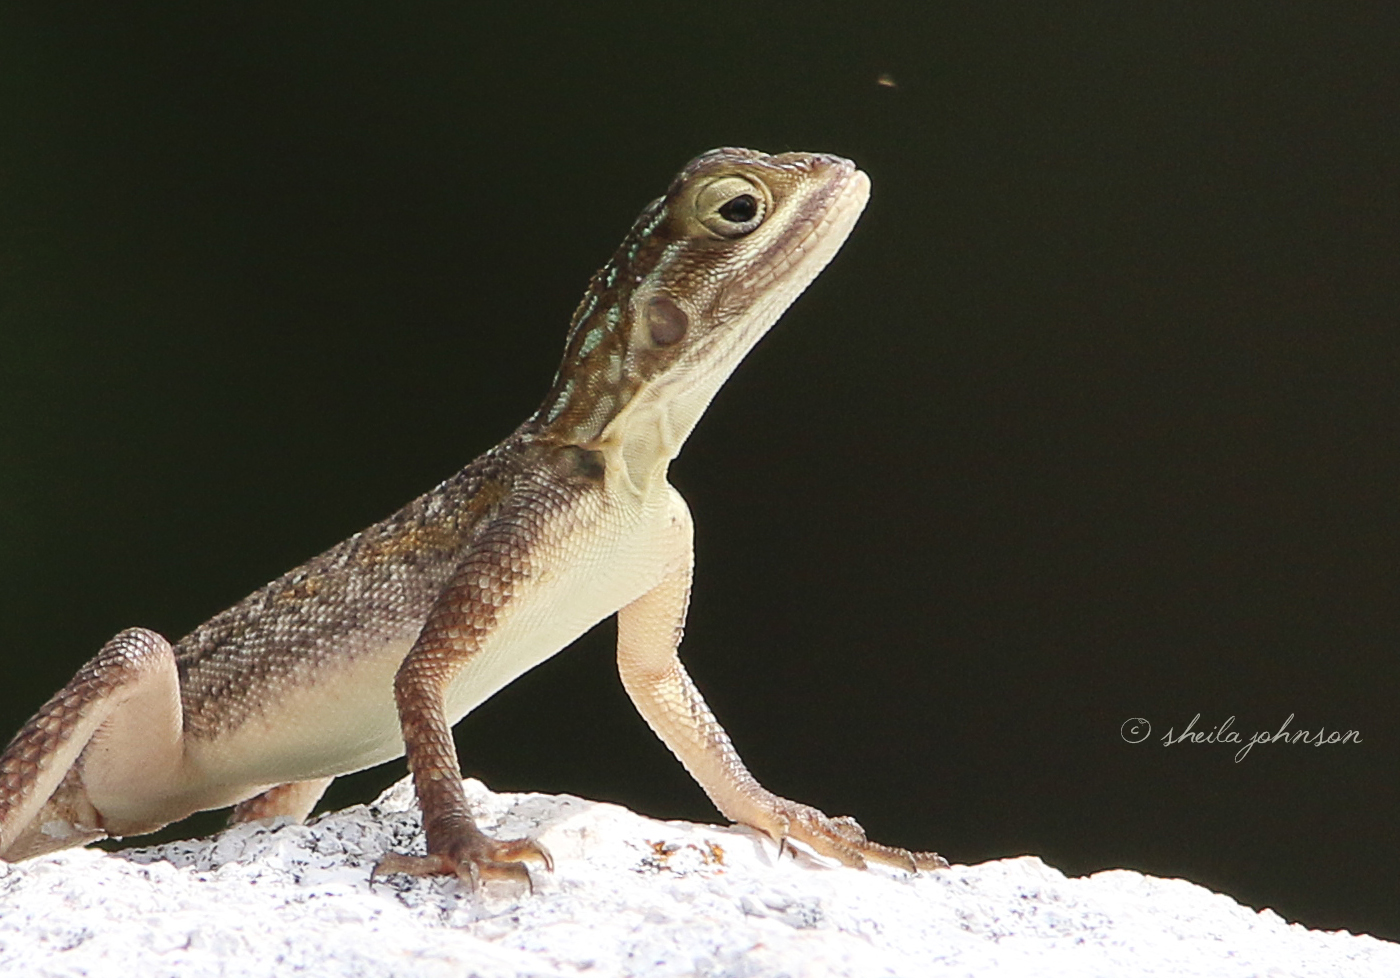 This Agama Lizard Reminds Me Of The Thinker, Regardless That The Pose Is Different. She Seems To Be Considering Whether Or Not To Have That Little Bug For A Pre-Dinner Snack.